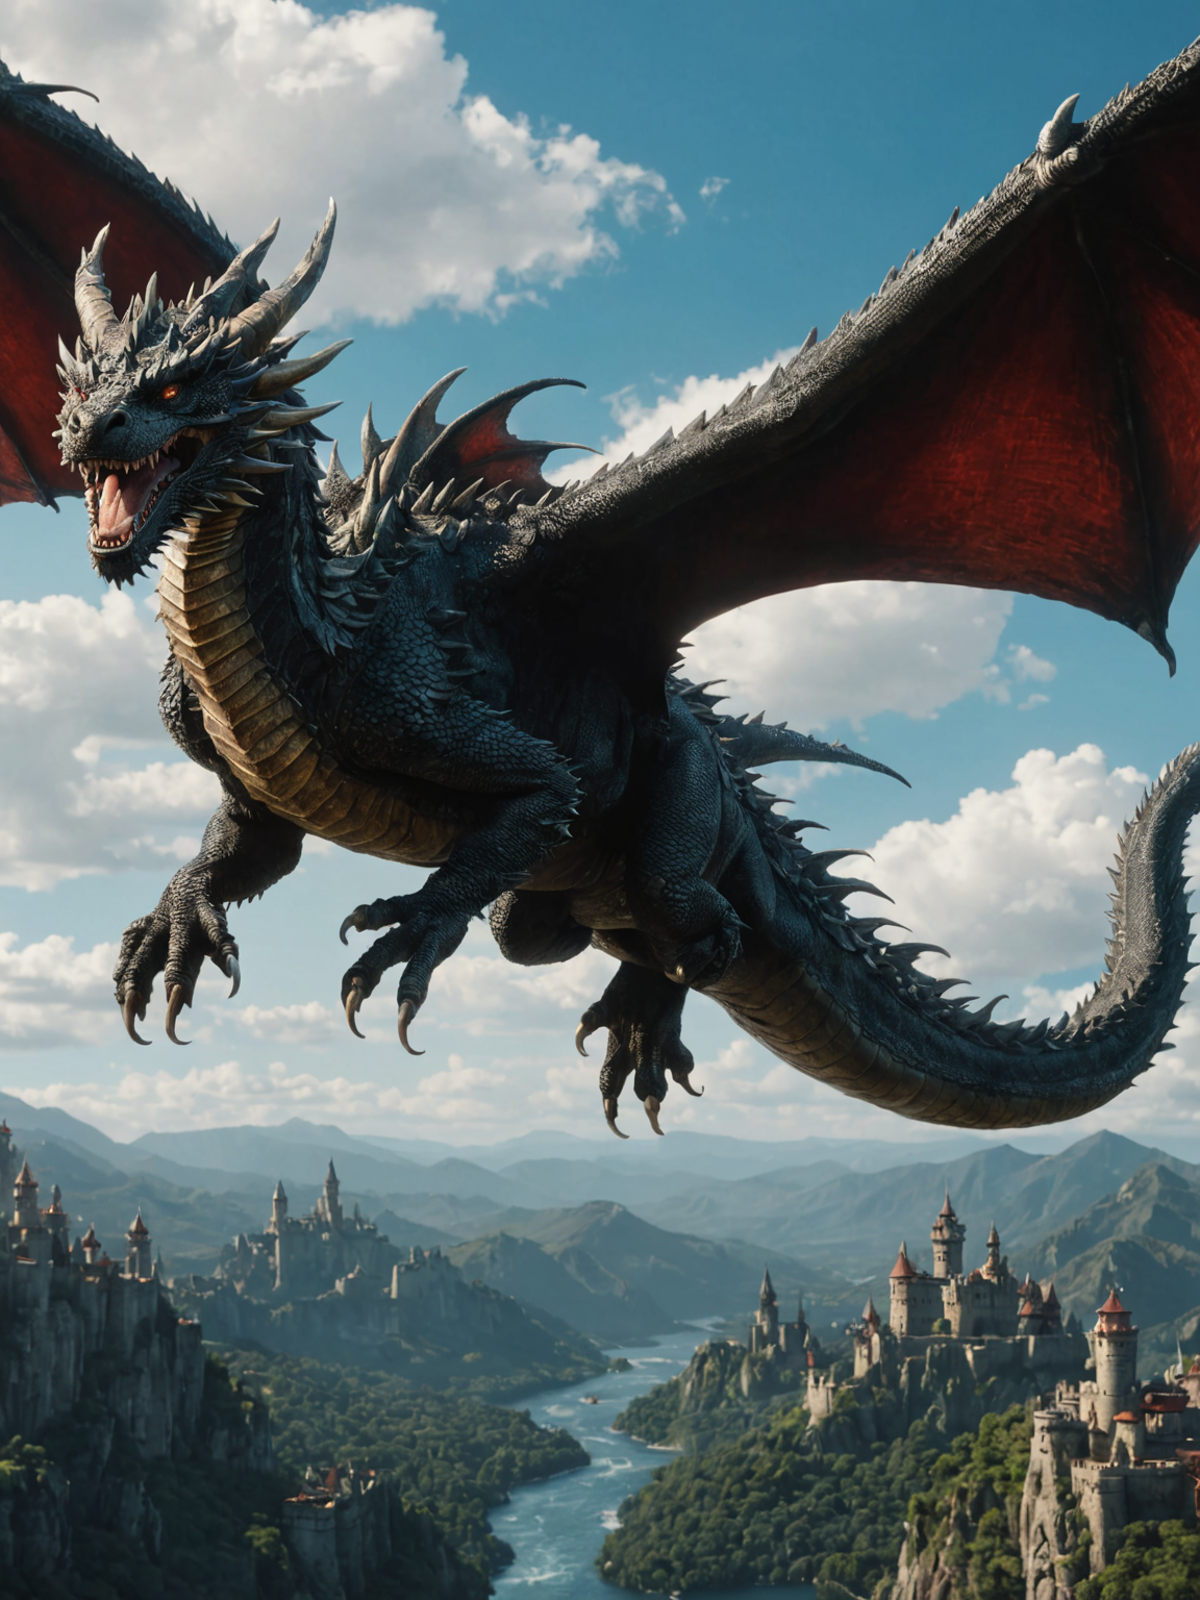 A large dragon with sharp claws and teeth flying over a castle.